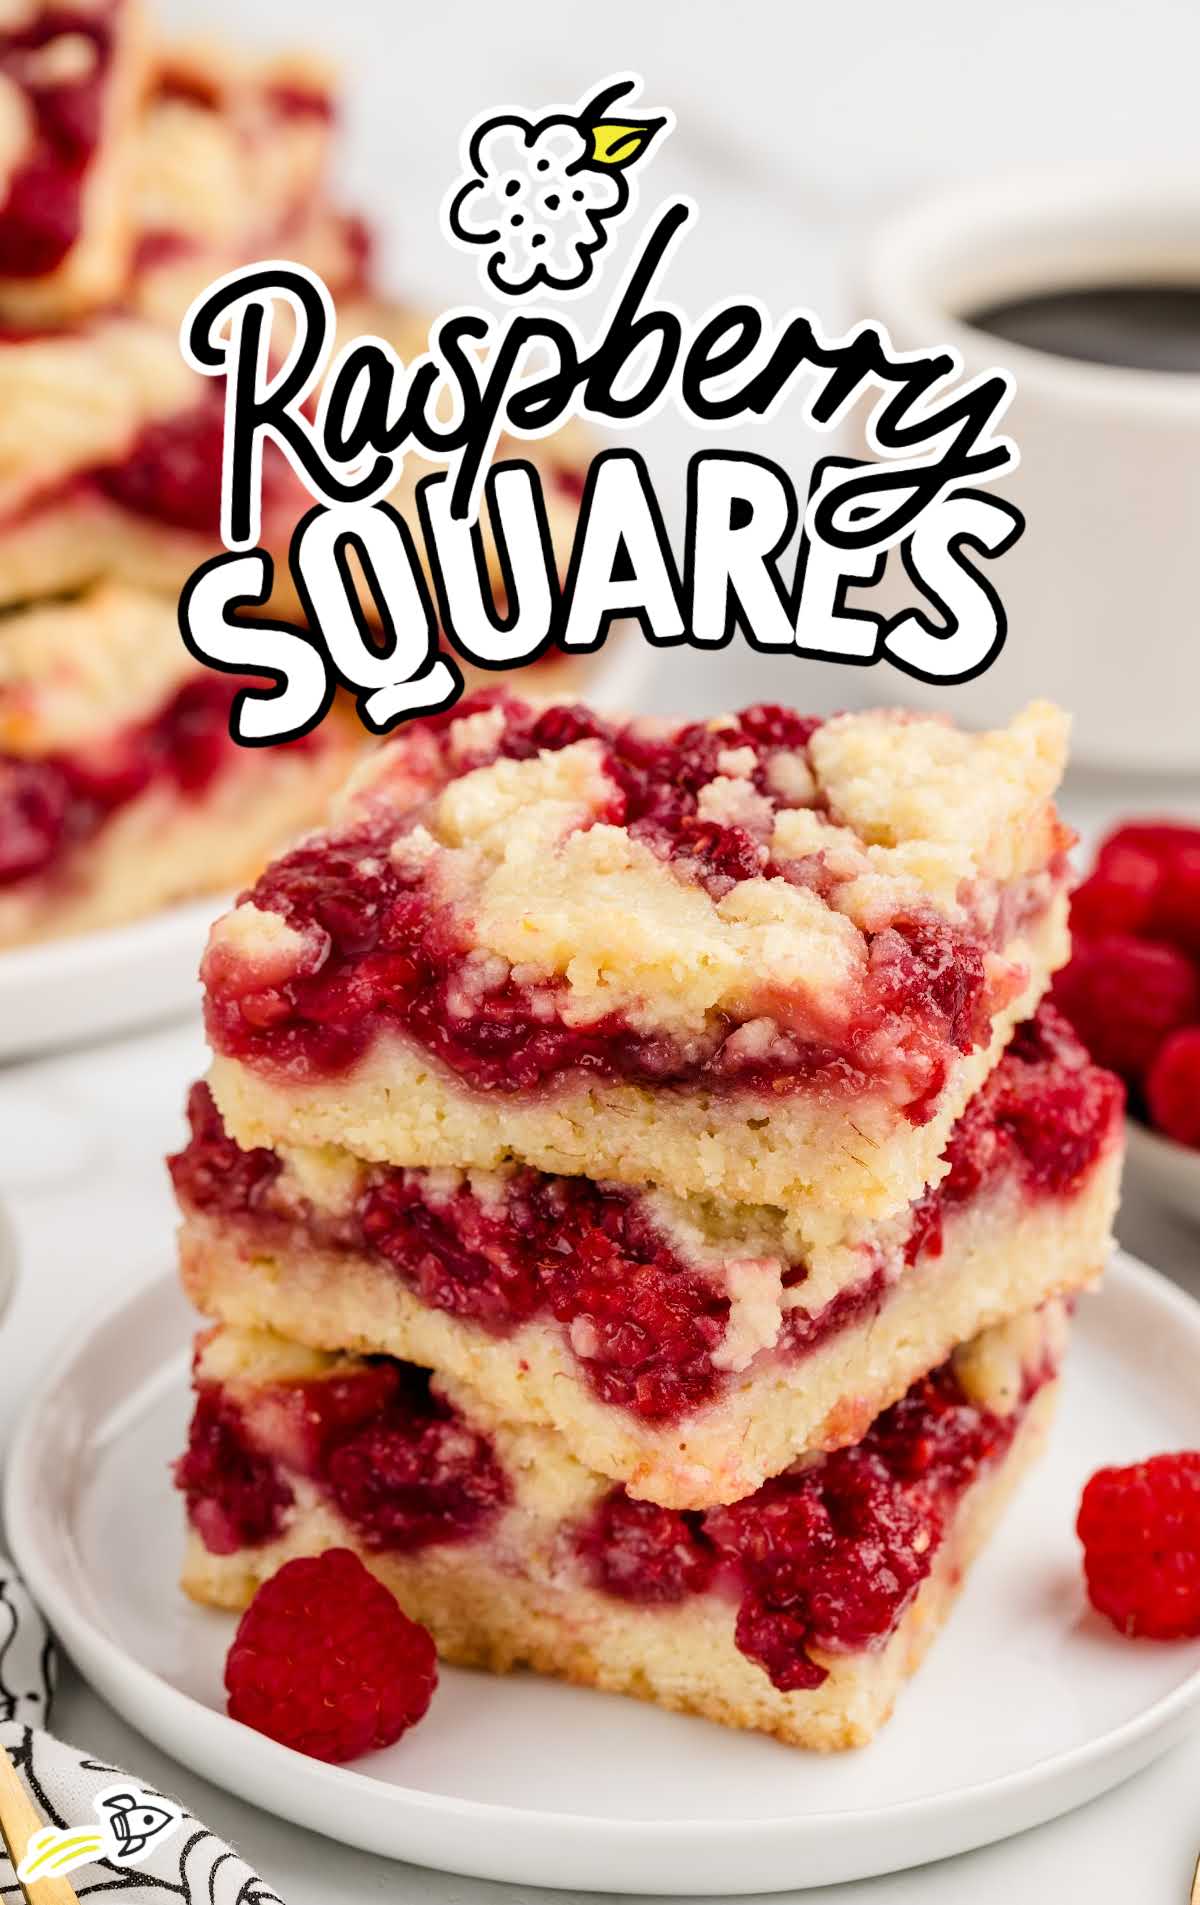 Raspberry Squares stacked on a plate